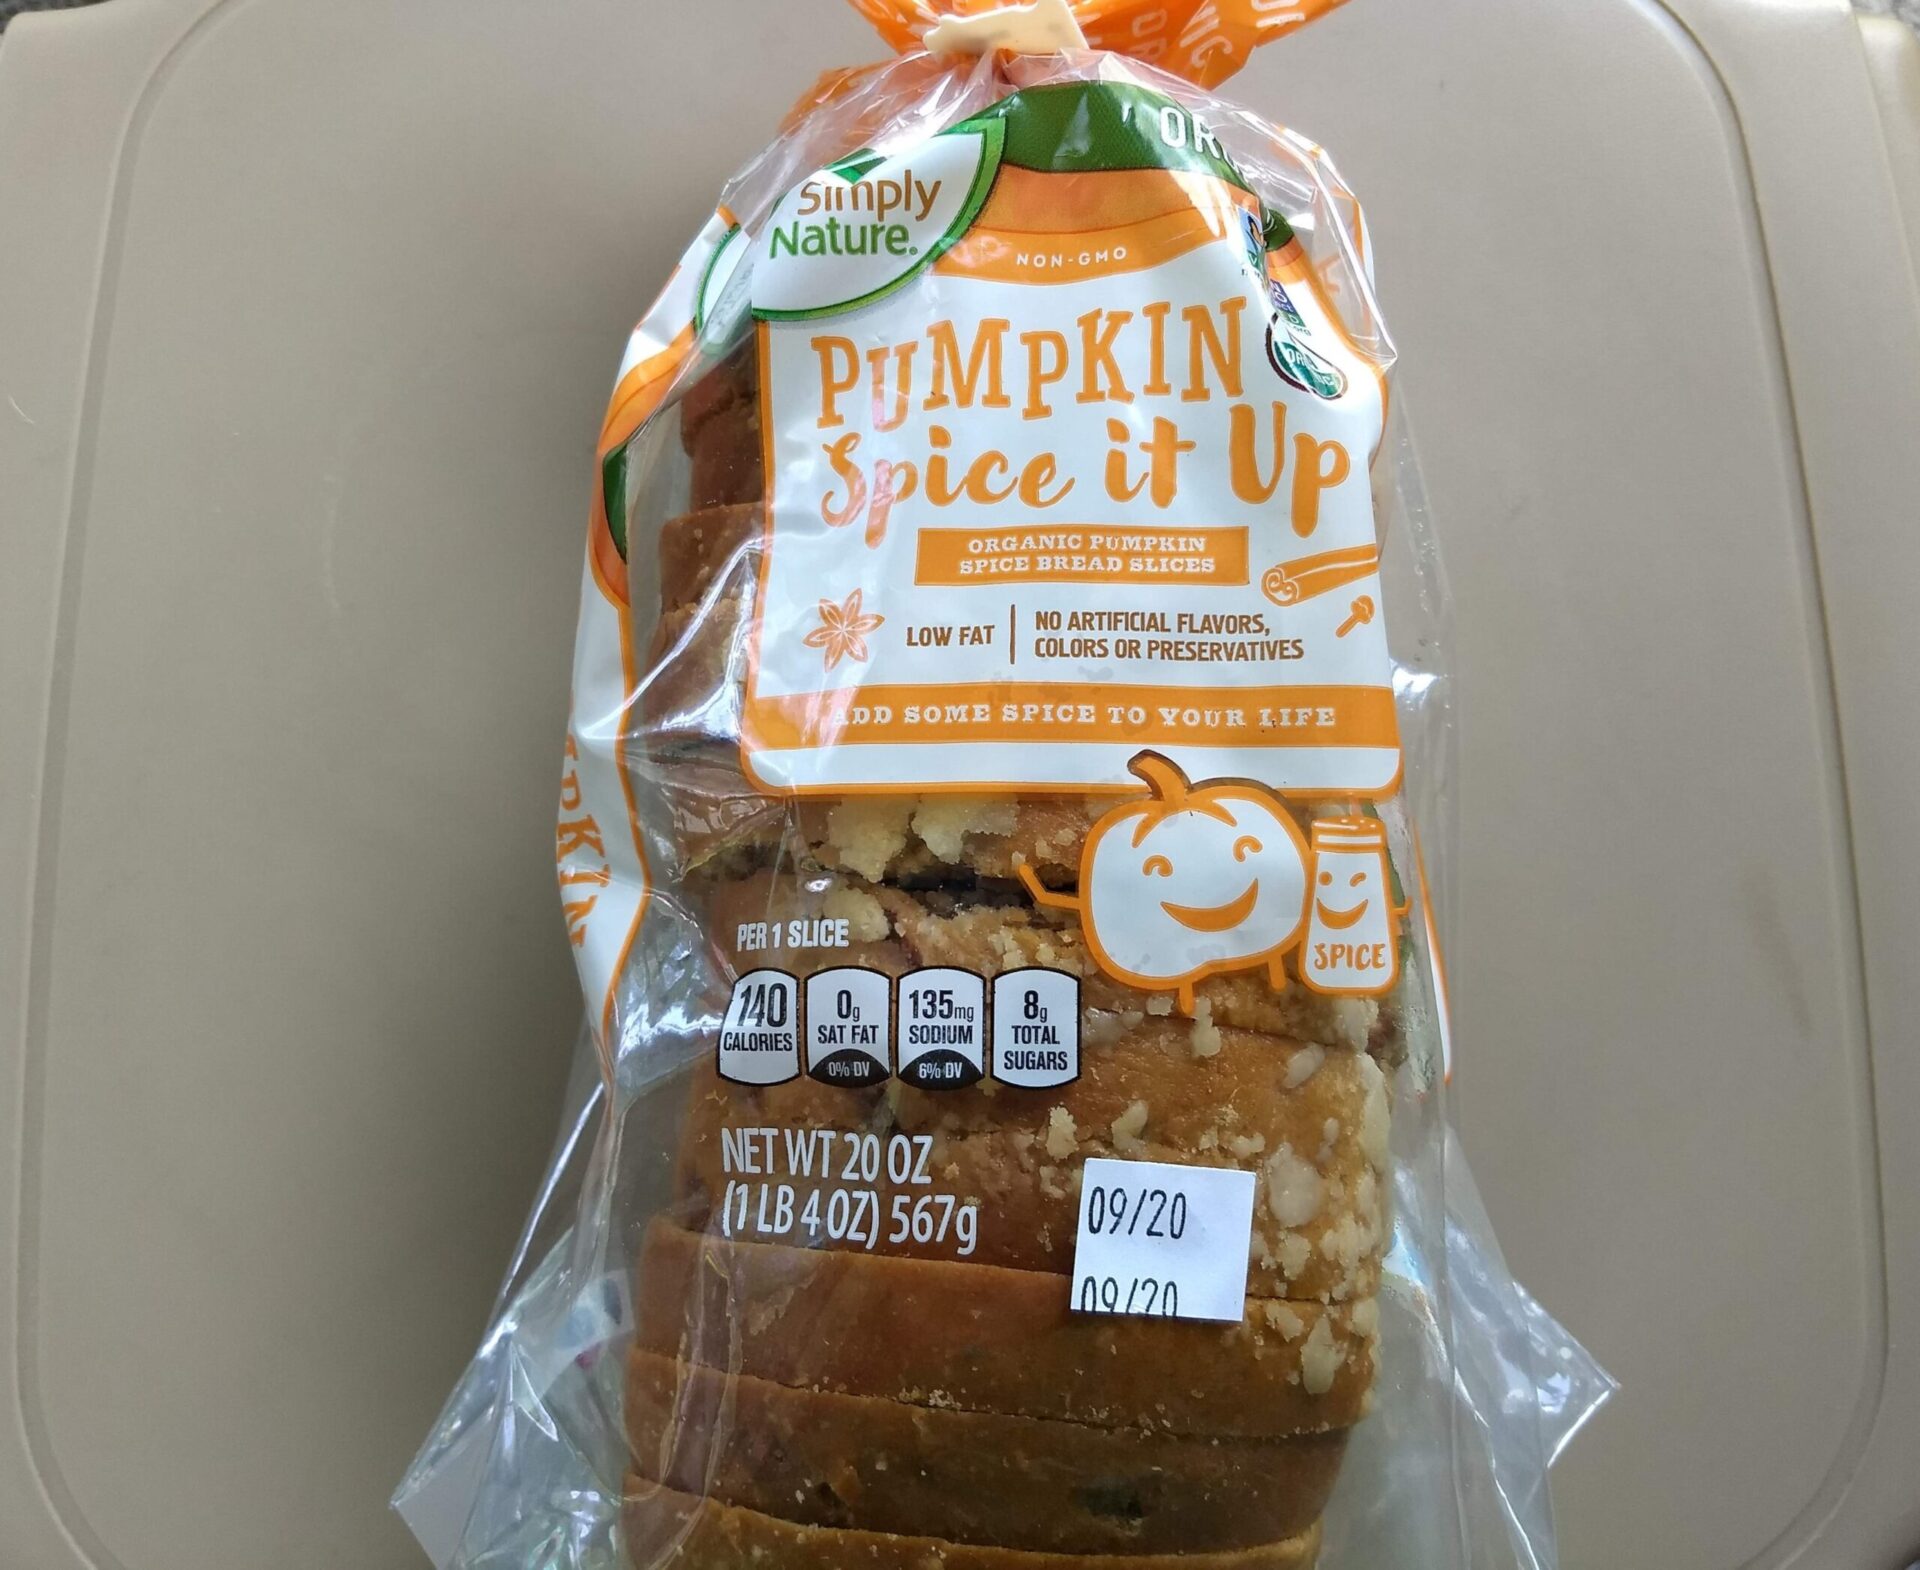 Simply Nature Pumpkin Spice It Up Bread